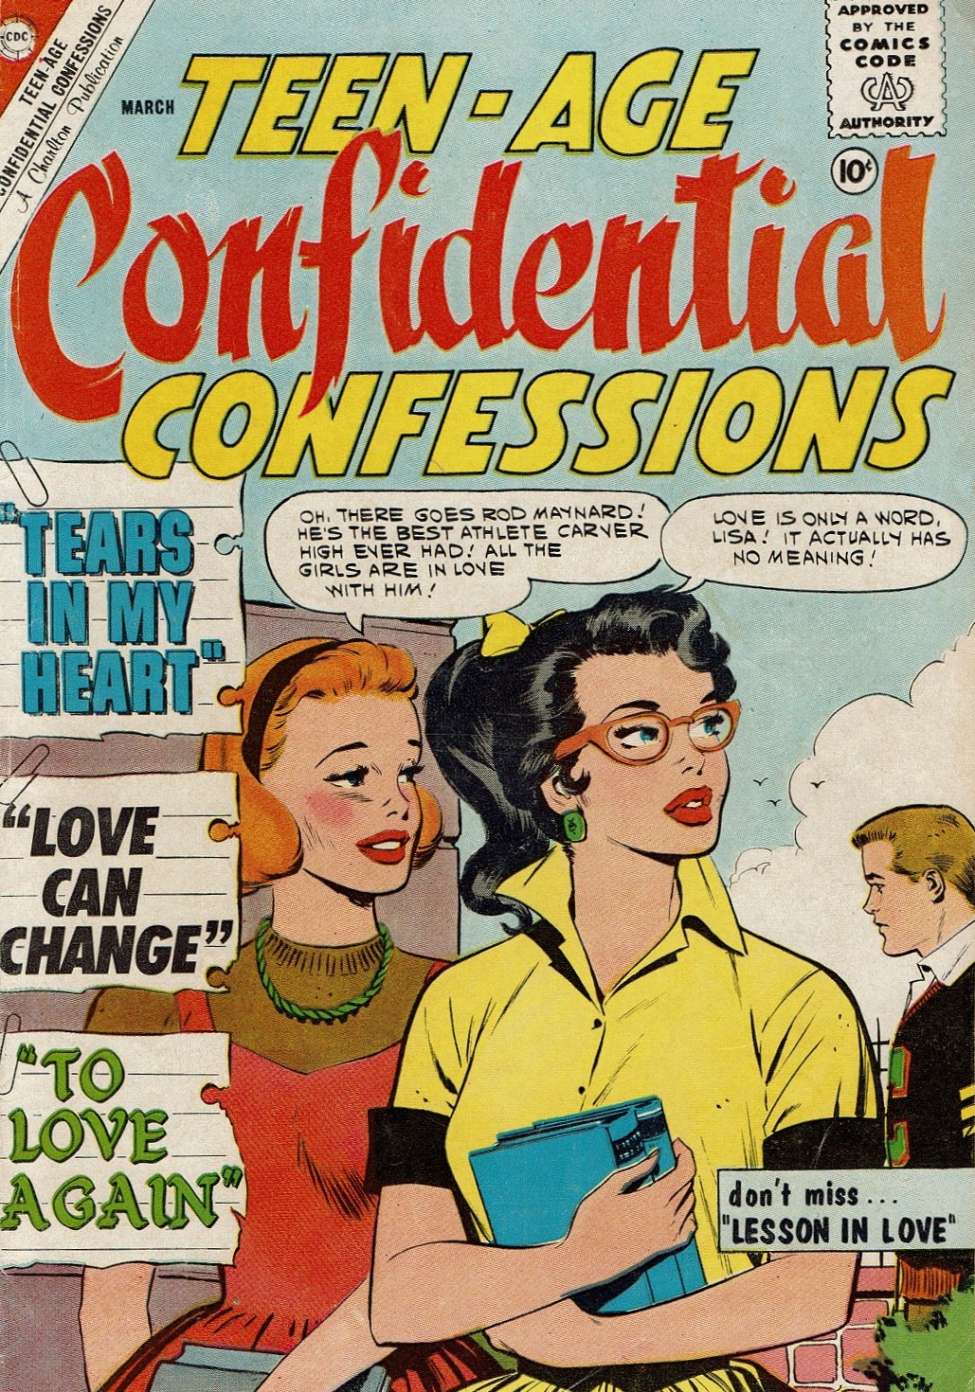 Book Cover For Teen-Age Confidential Confessions 5